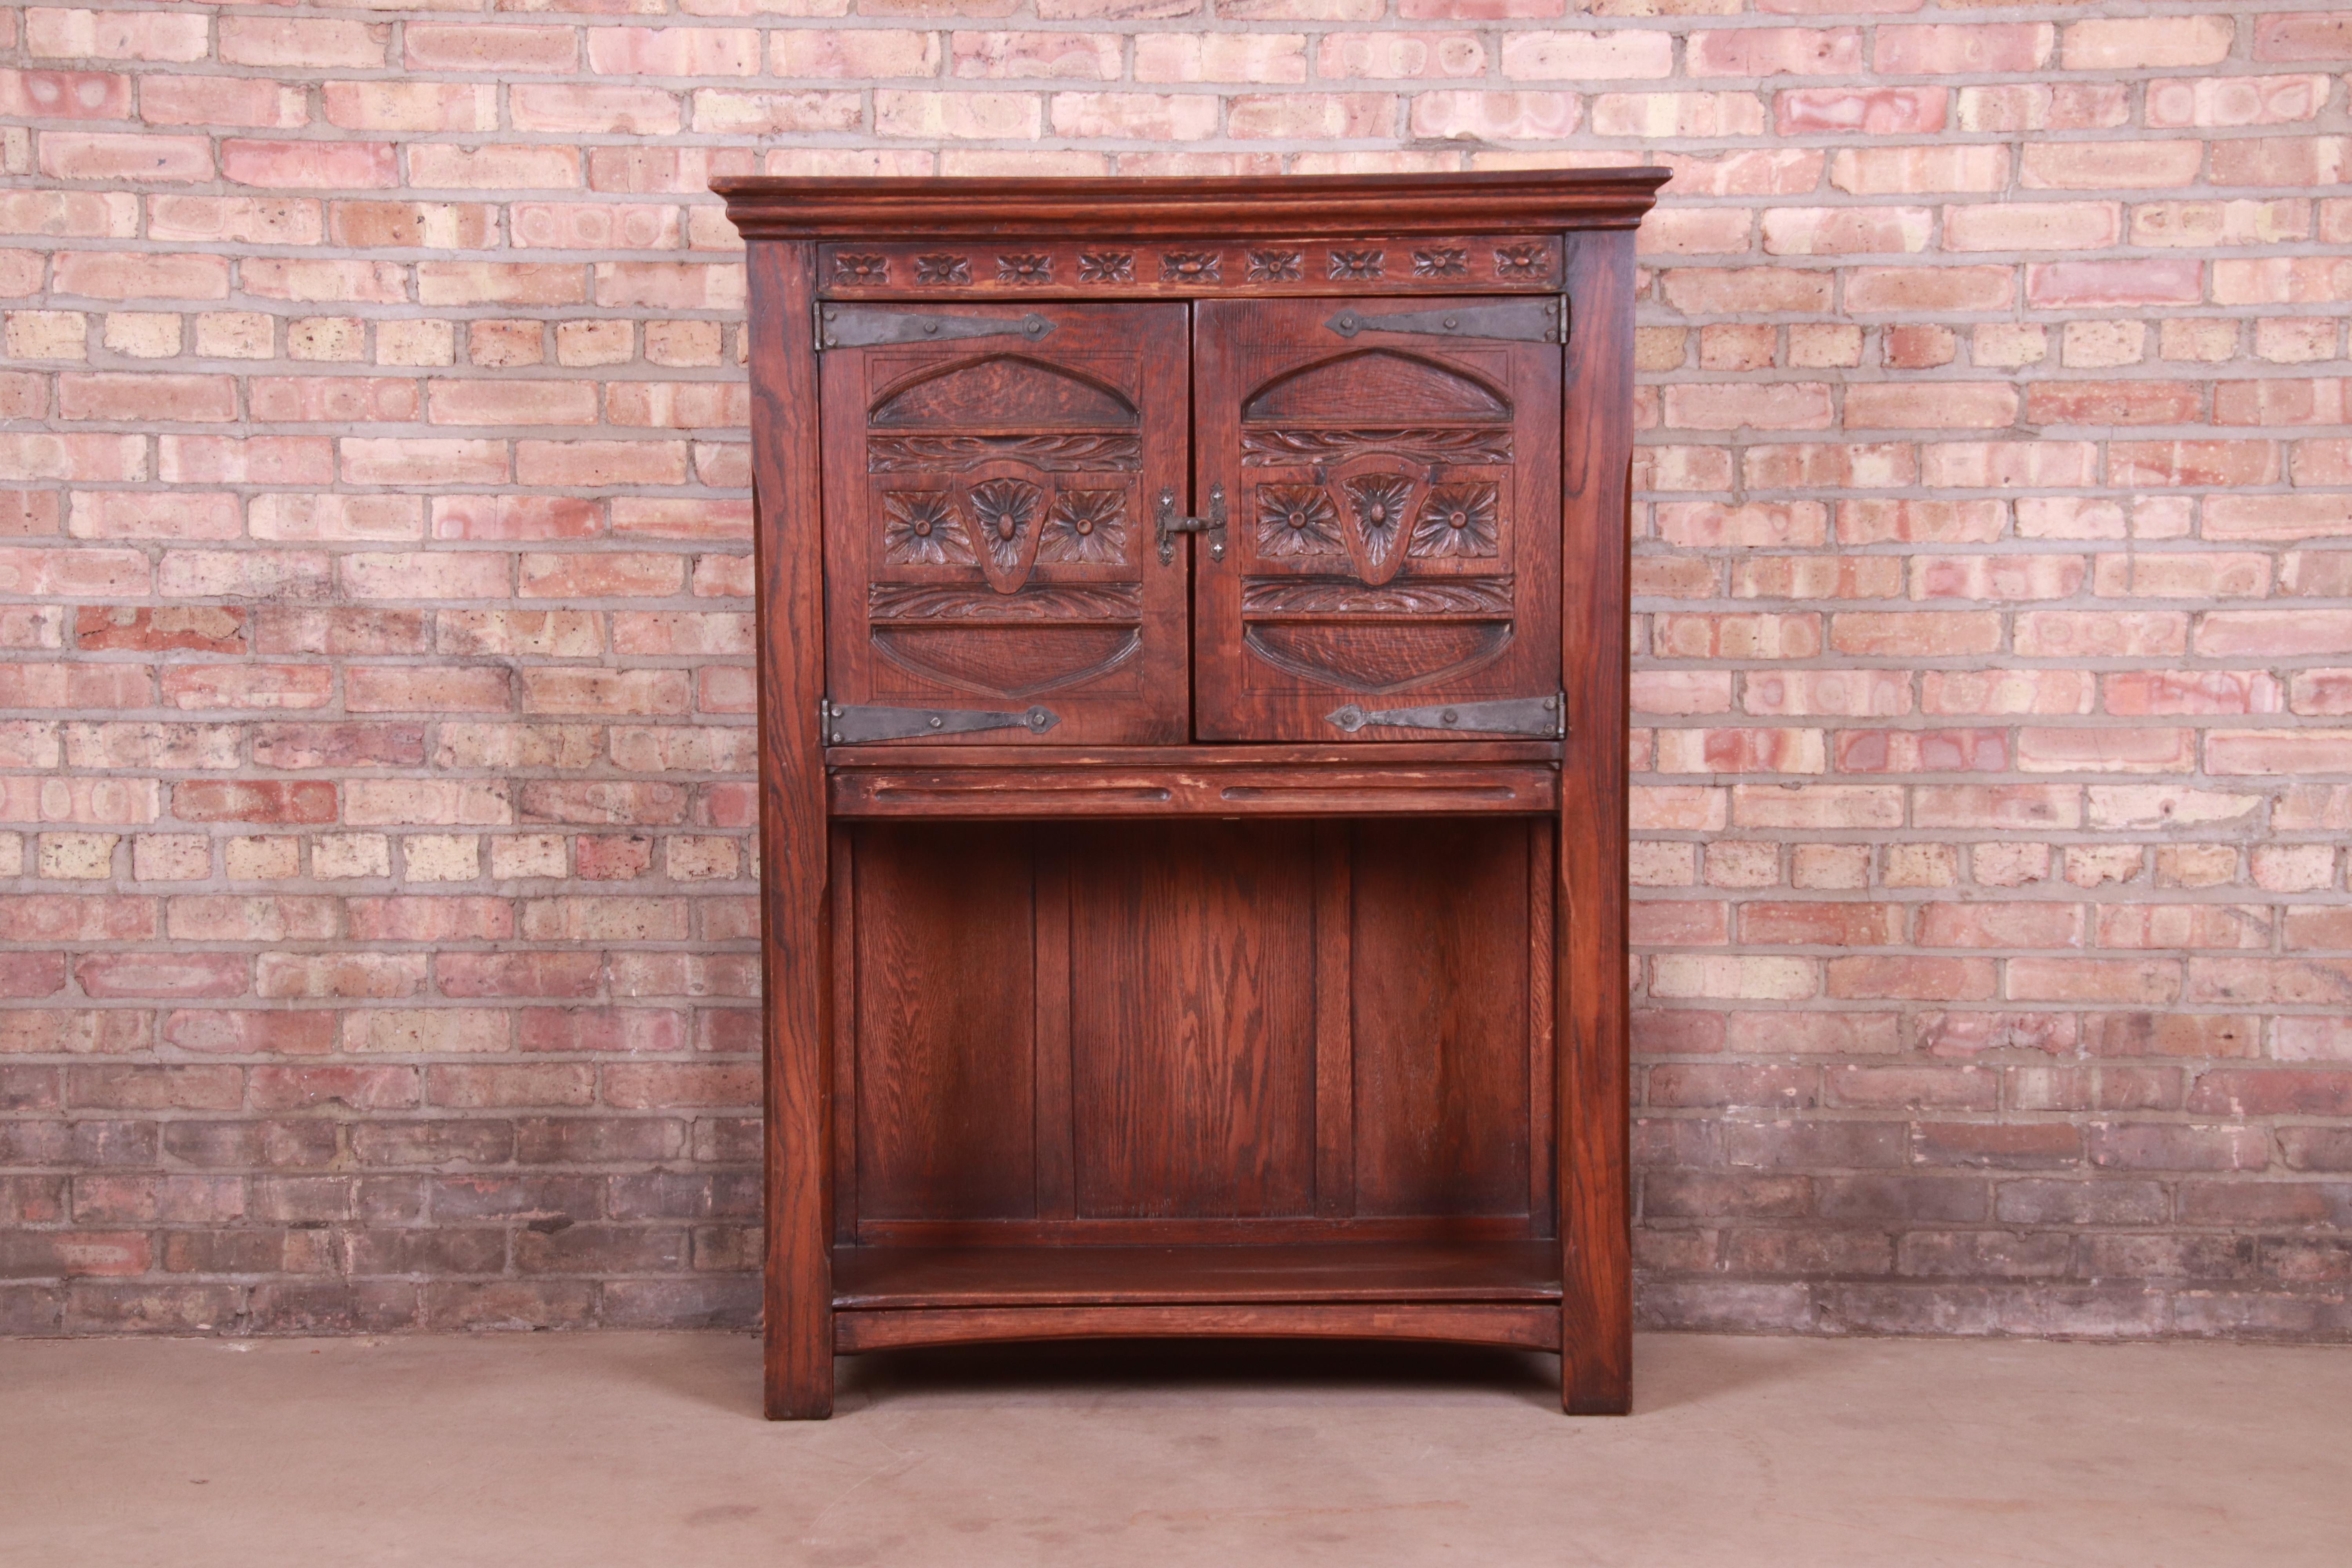 A gorgeous antique Rustic European or Gothic Revival bar cabinet

Likely Belgian; Late 19th Century

Carved solid oak, with original hammered iron hardware.

Measures: 40.63